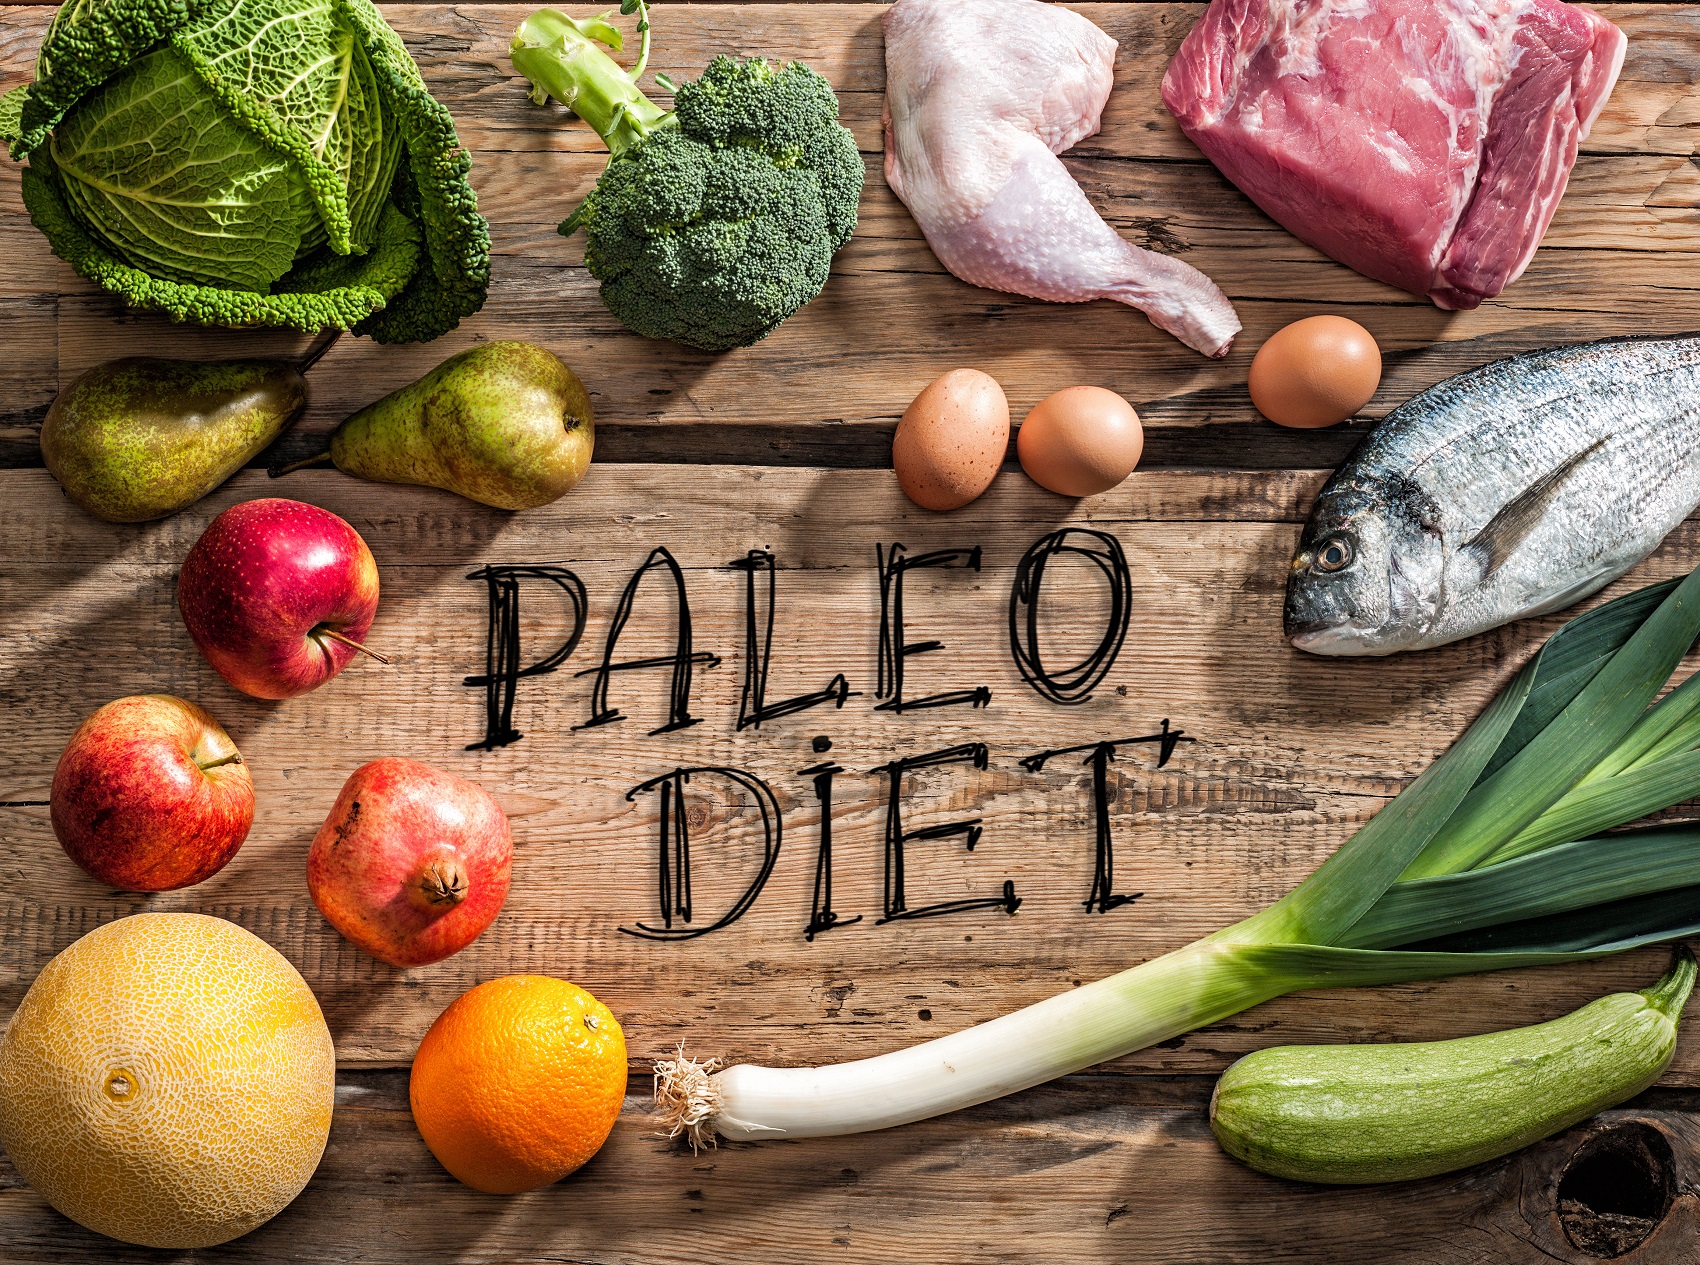 A shopping list with various paleo-friendly foods